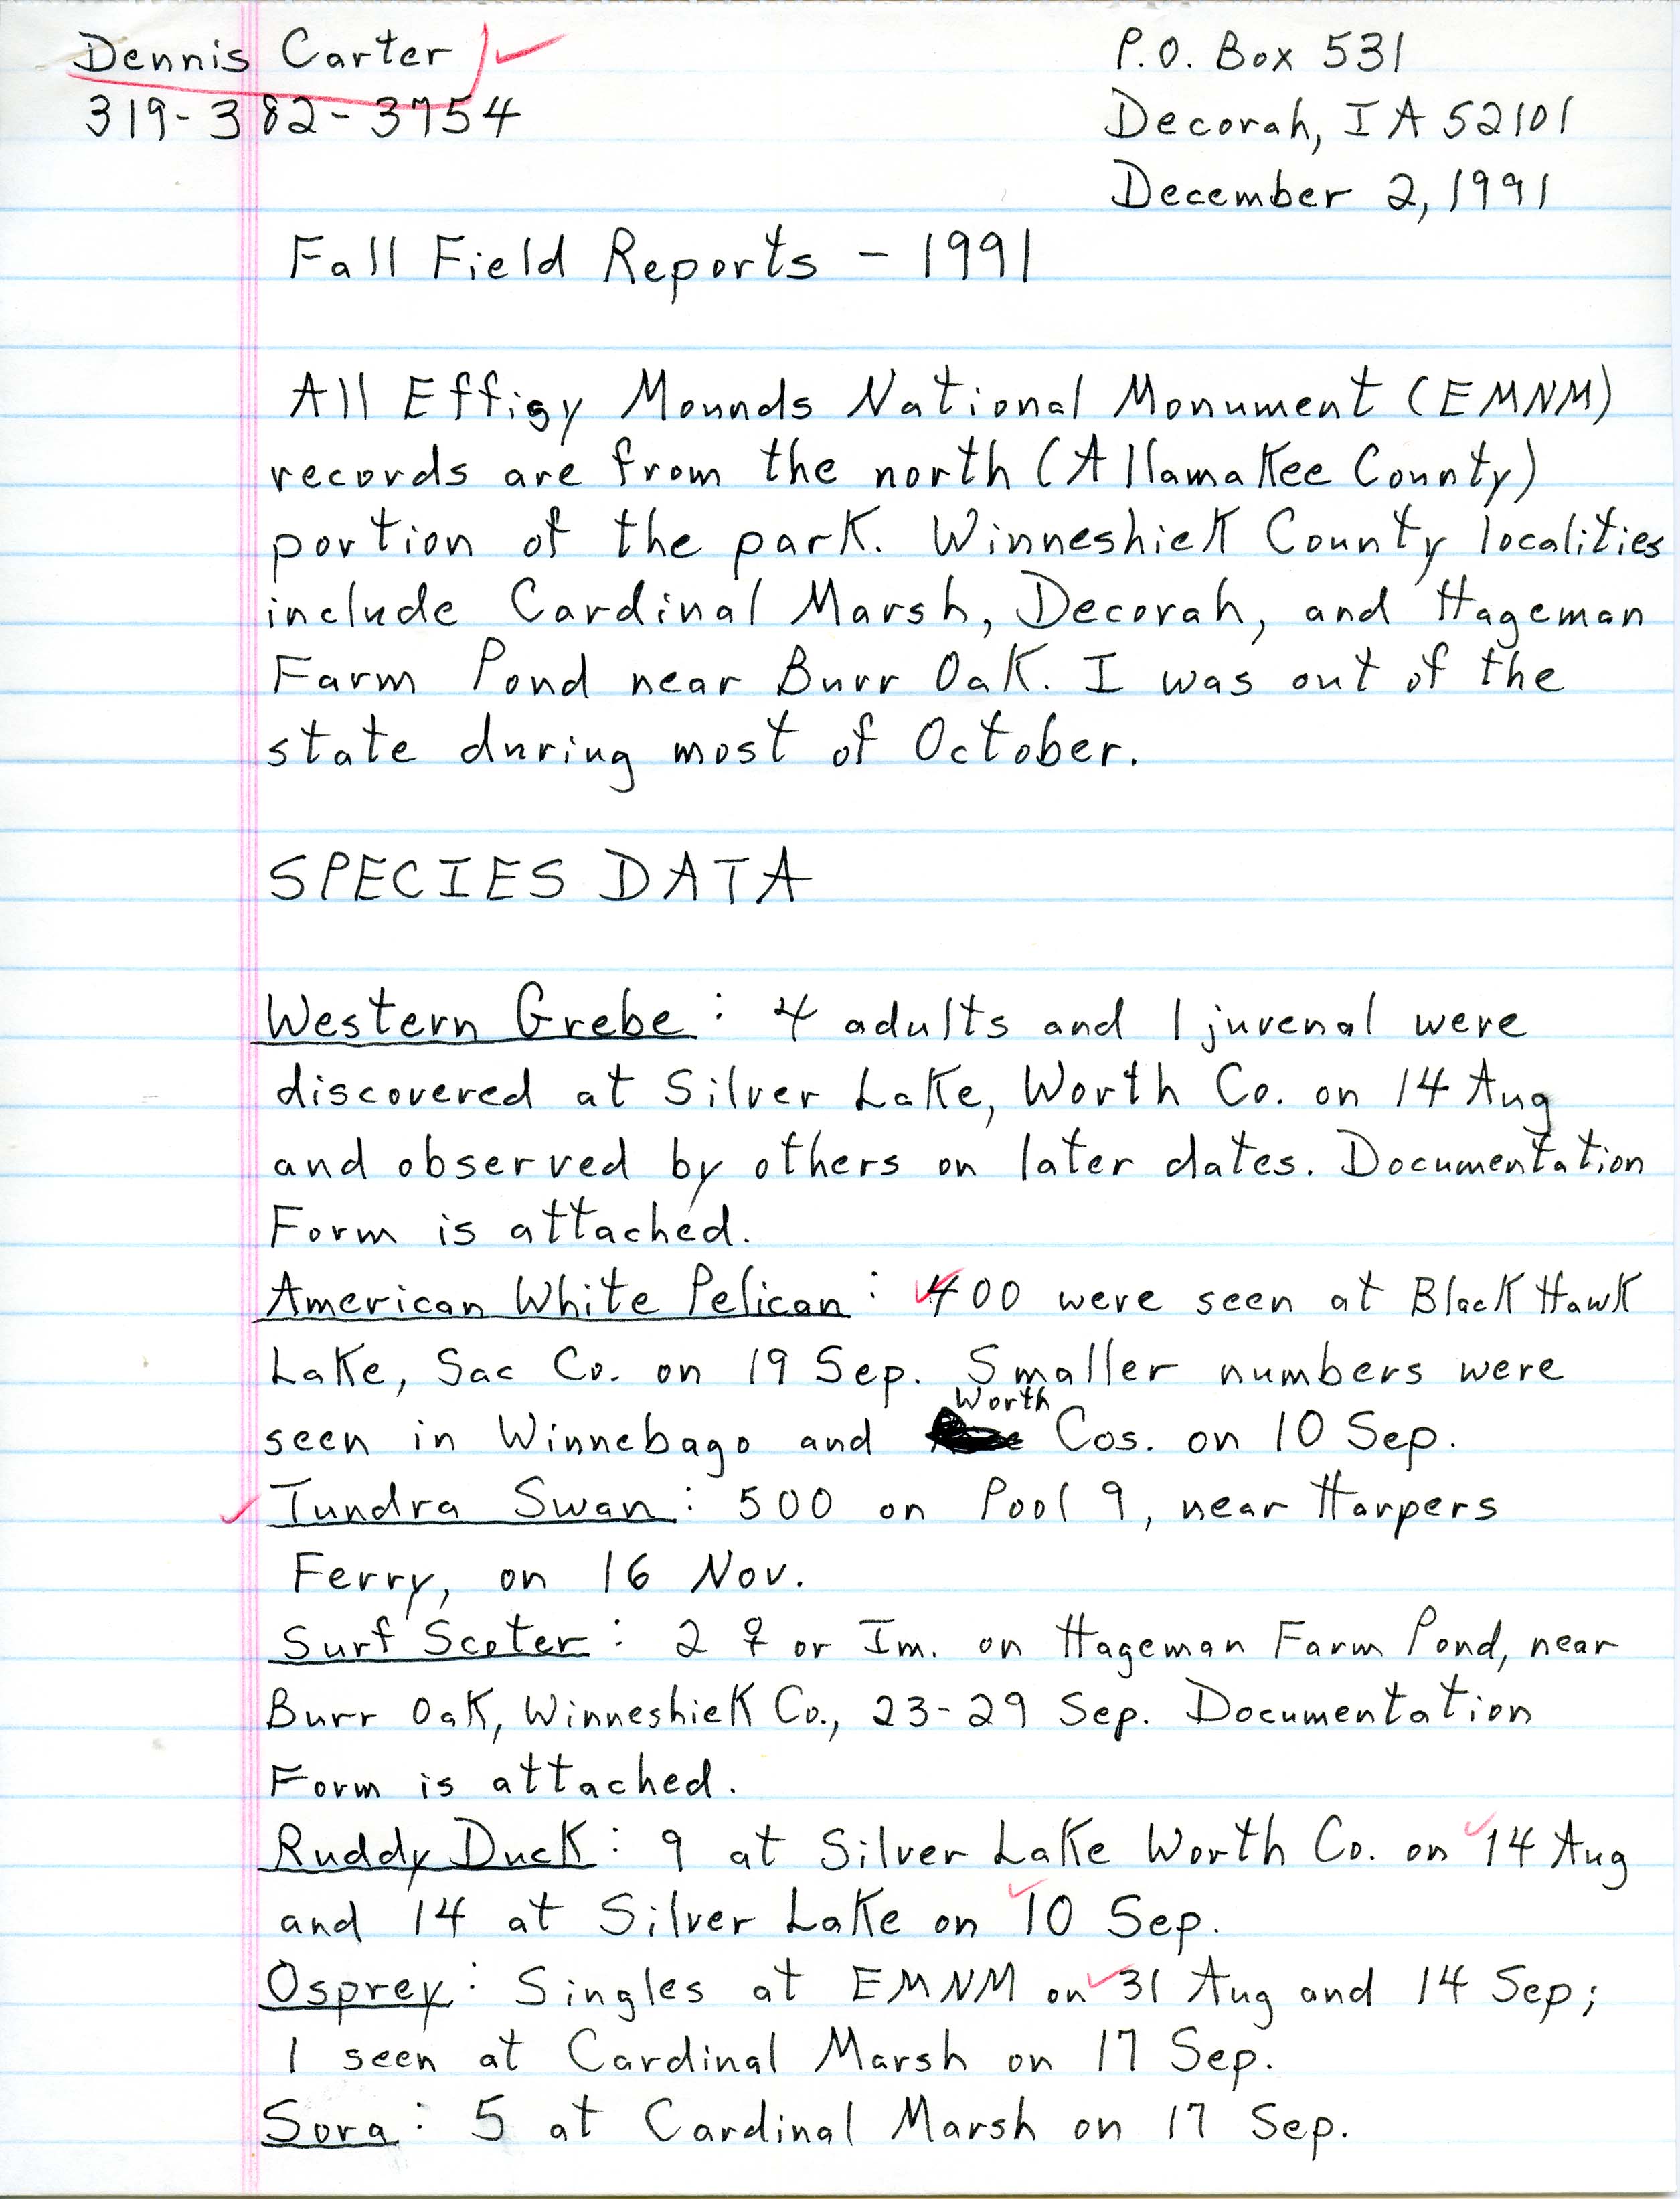 Field notes contributed by Dennis L. Carter, December 2, 1991